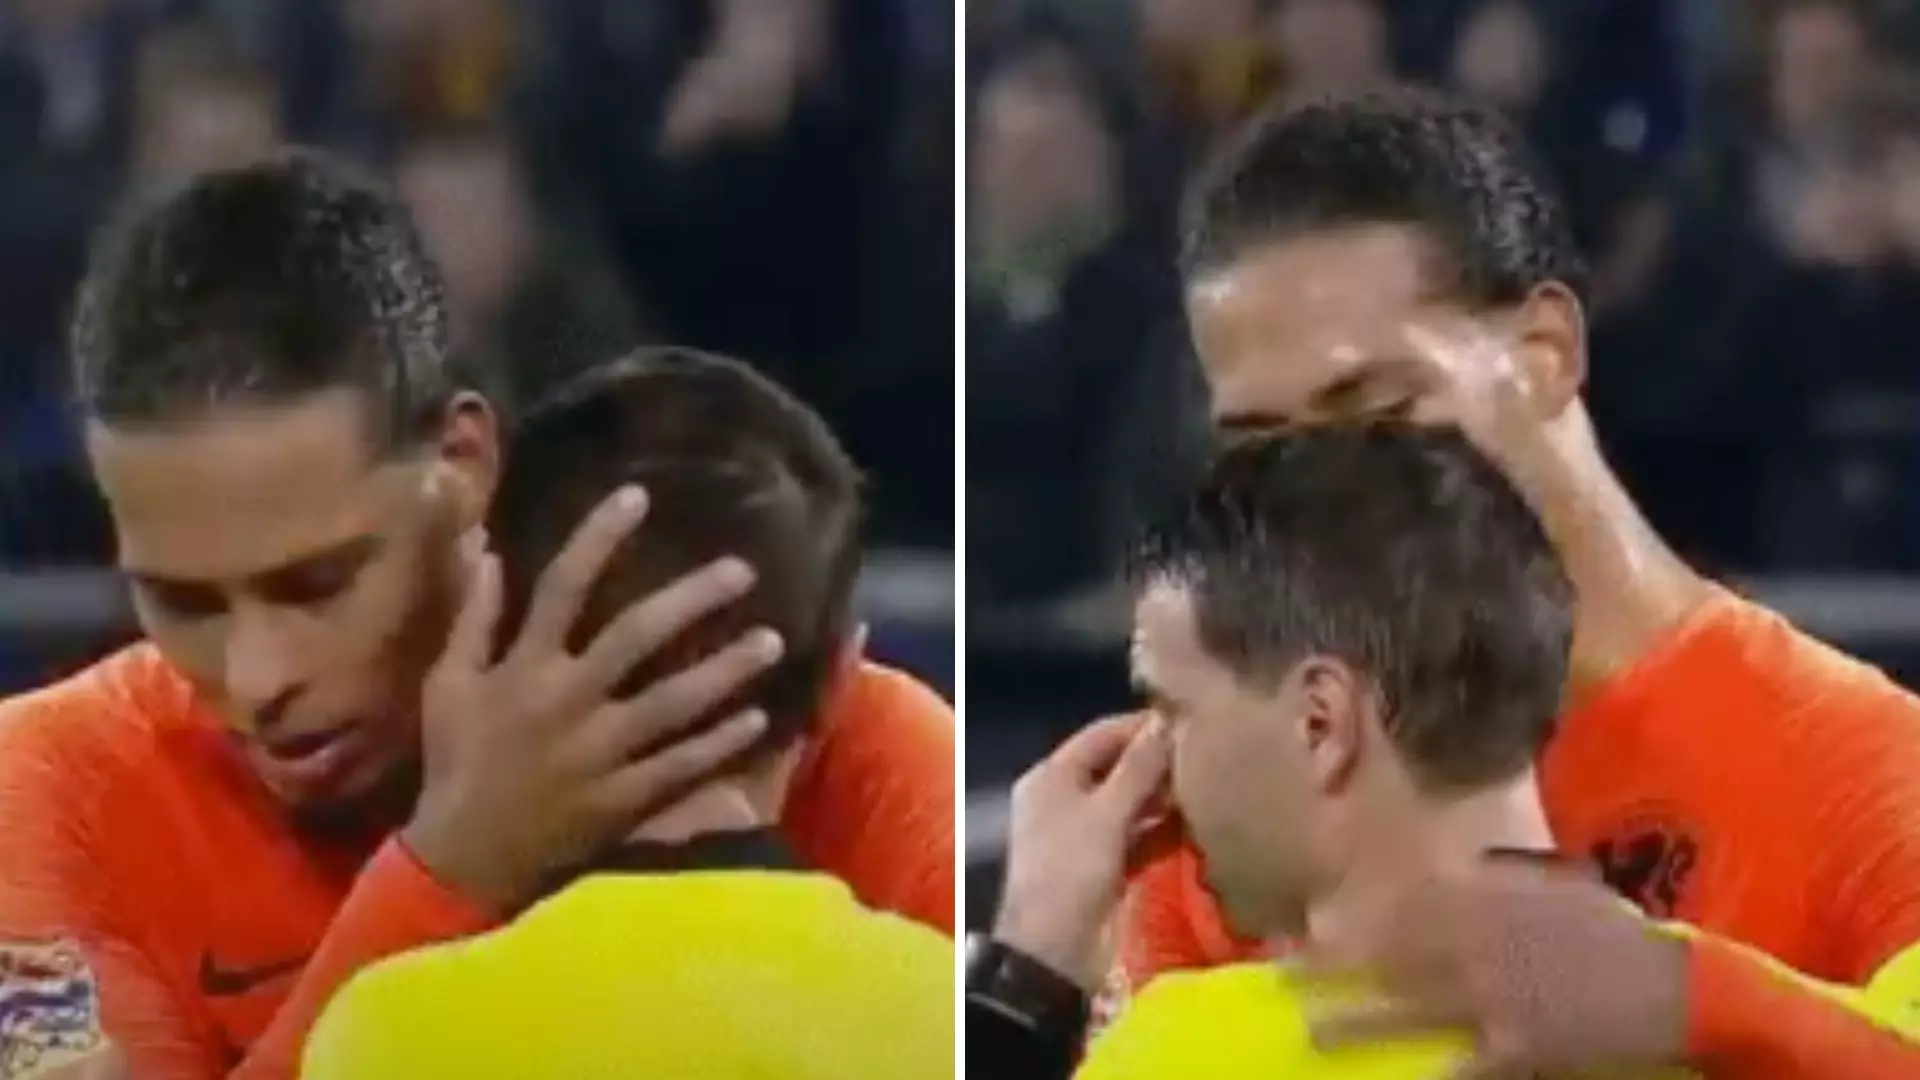 Liverpool's Virgil Van Dijk Warmly Embraces Teary-Eyed Referee Whose Mother Passed Away